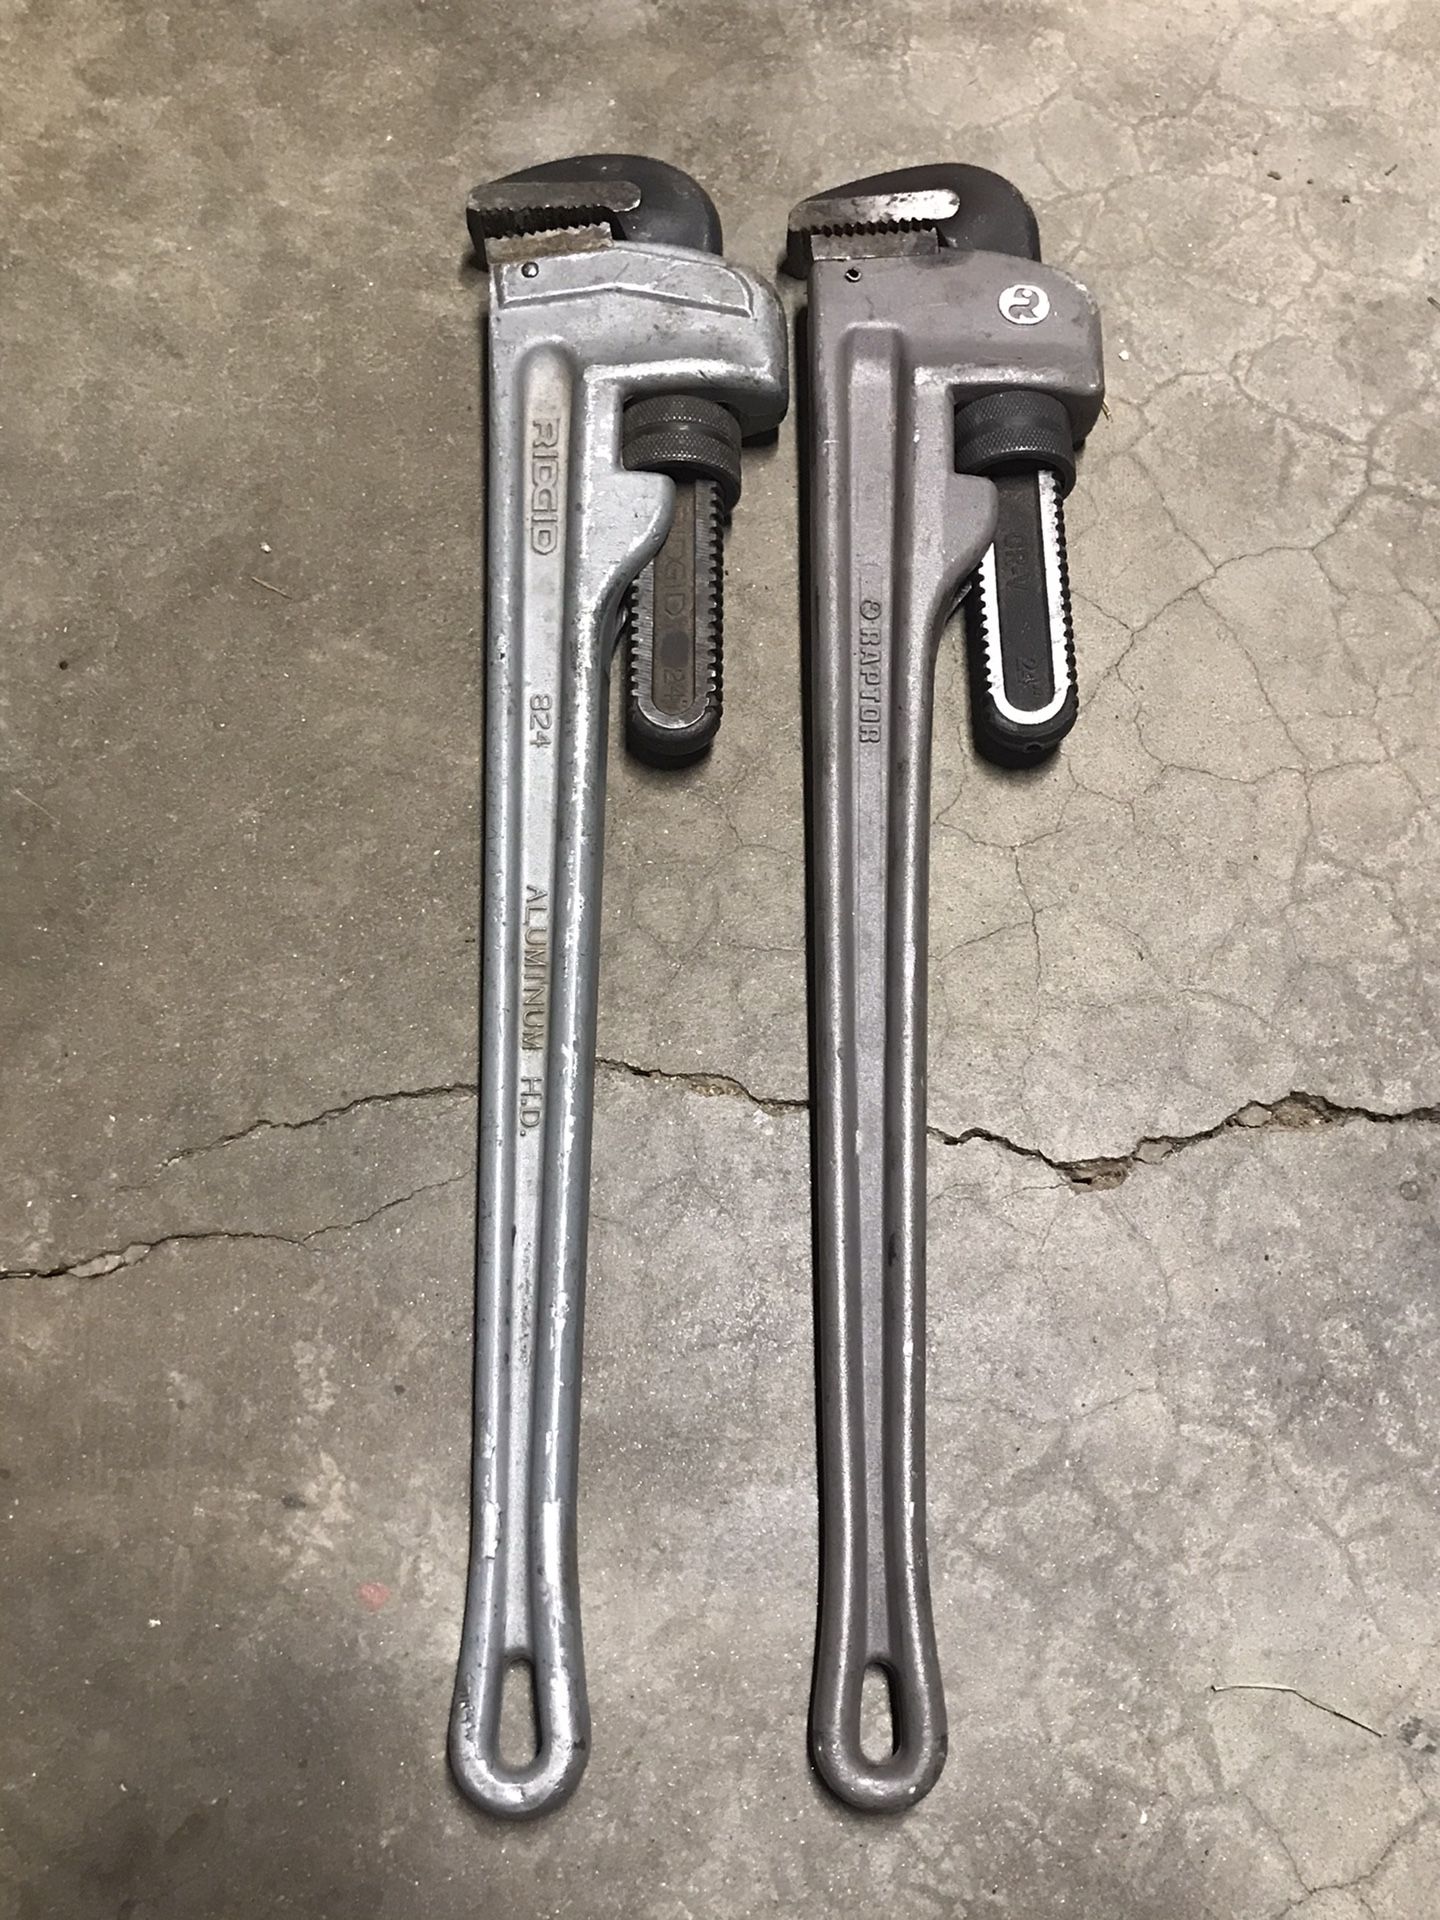 24” pipe wrenches